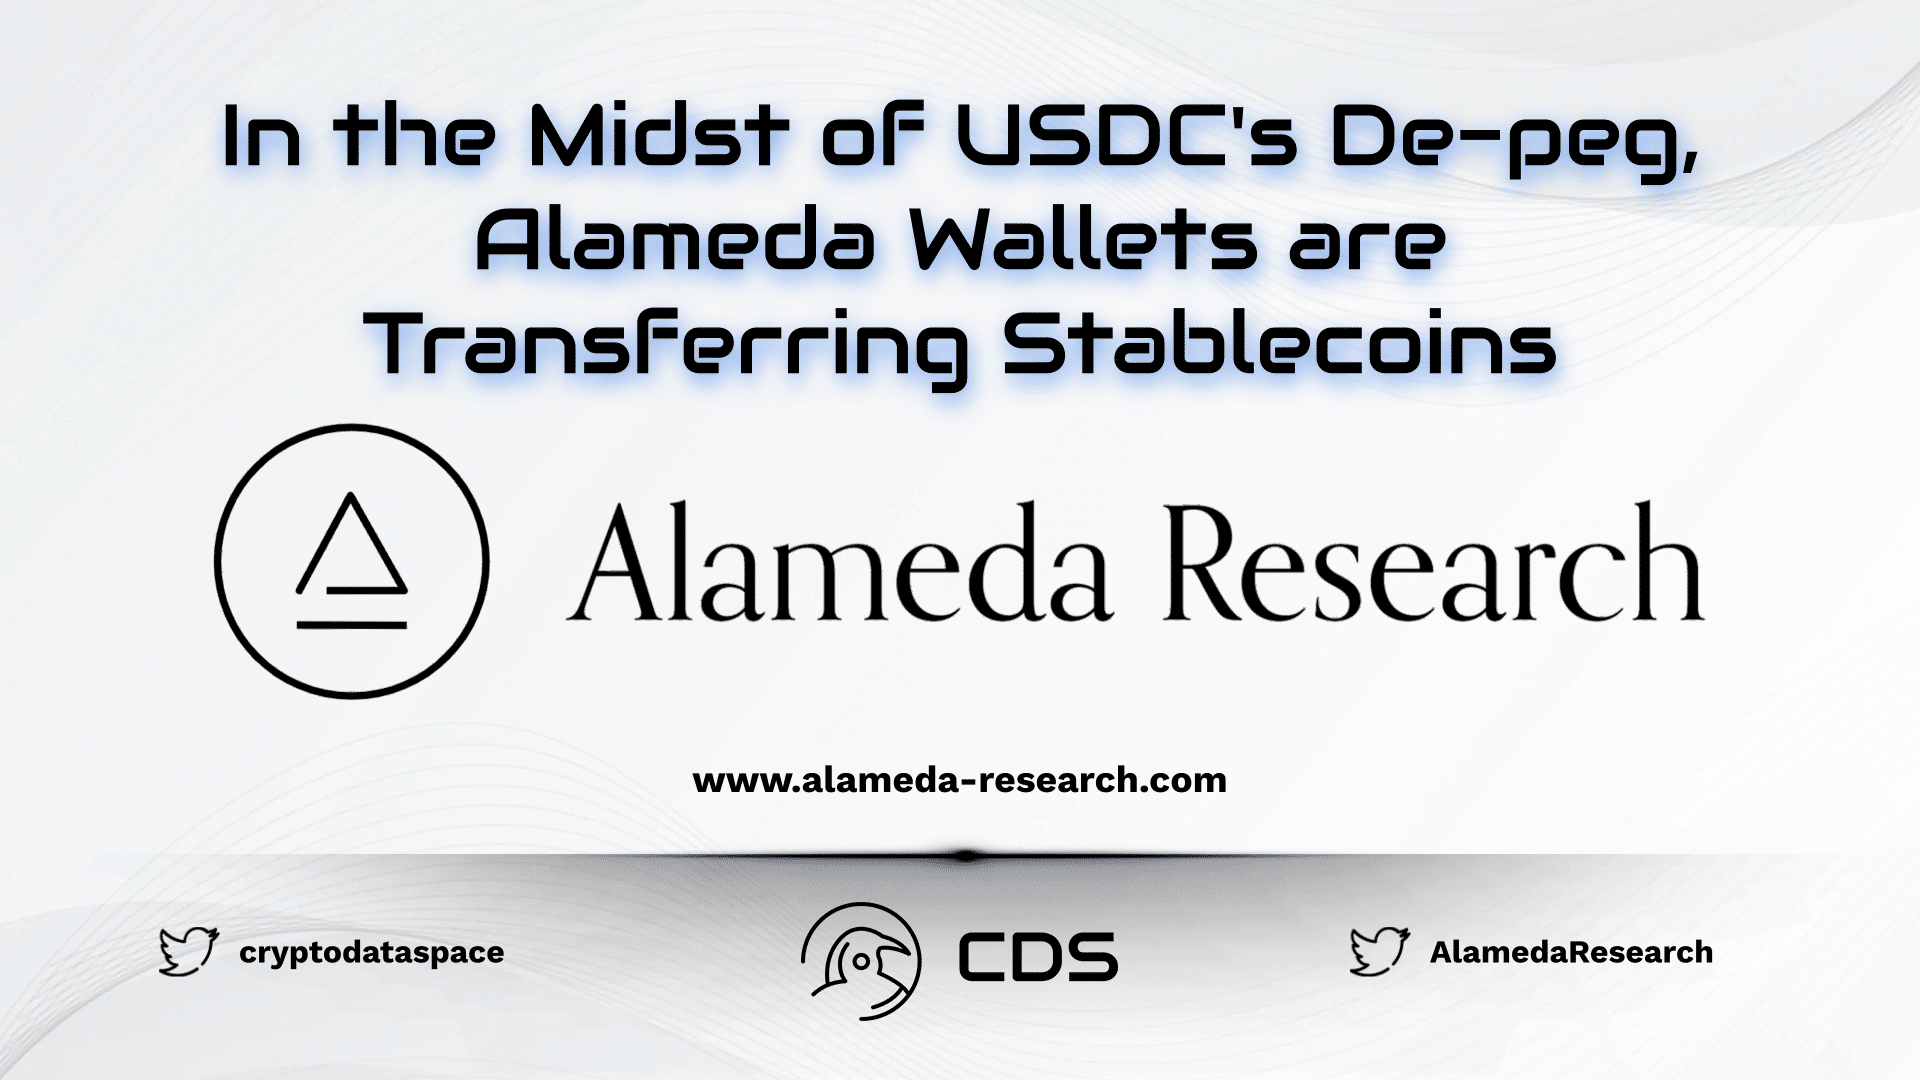 In the Midst of USDC's De-peg, Alameda Wallets are Transferring Stablecoins